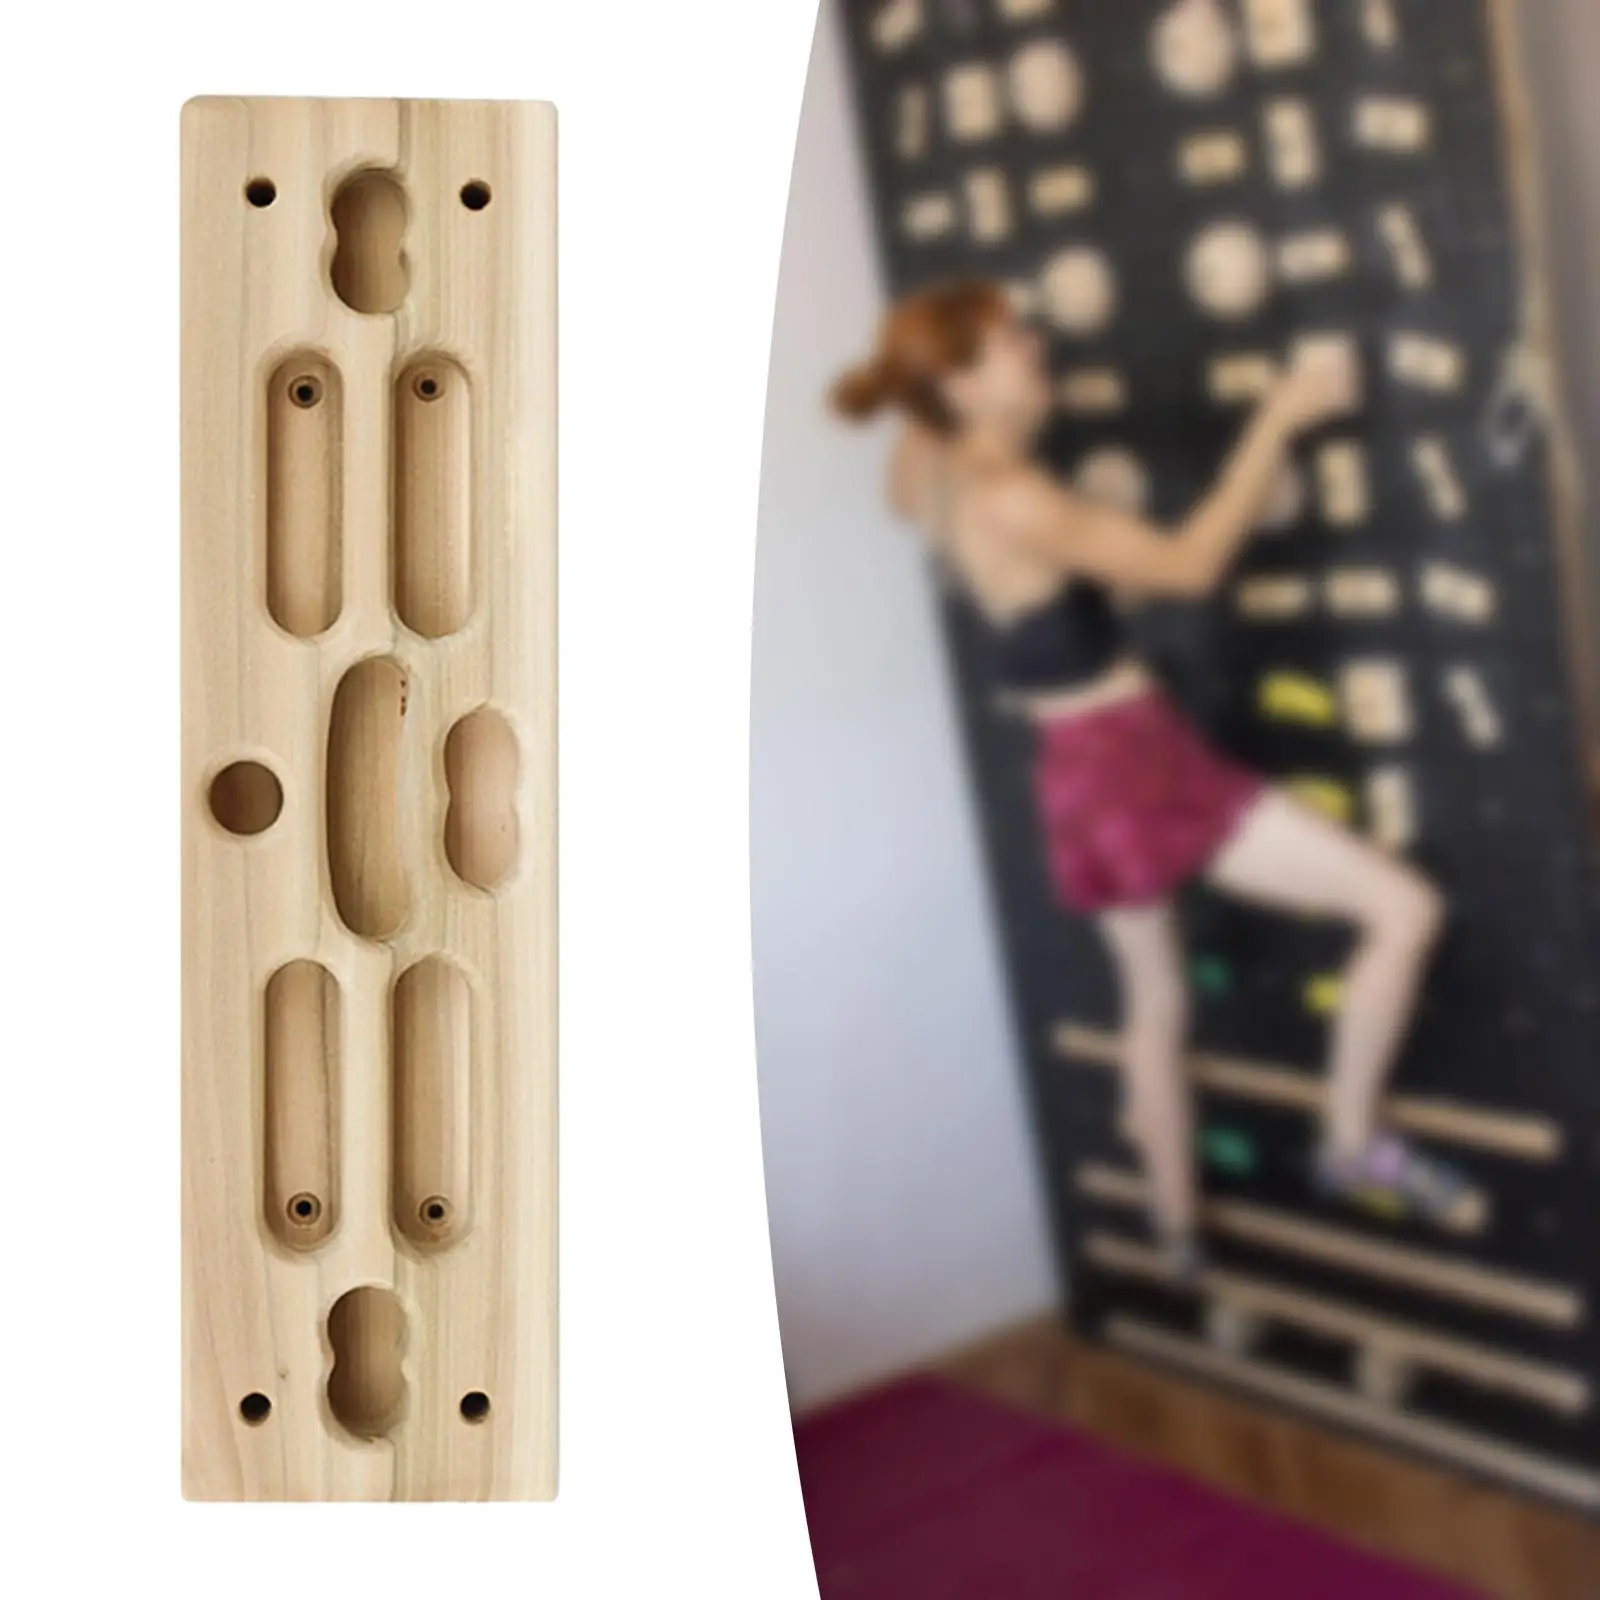 Climbing Fingerboard Exerciser Strength Trainer Training Finger Grip Climbing Hangboard for Wall Home Doorway Athletes Outdoor